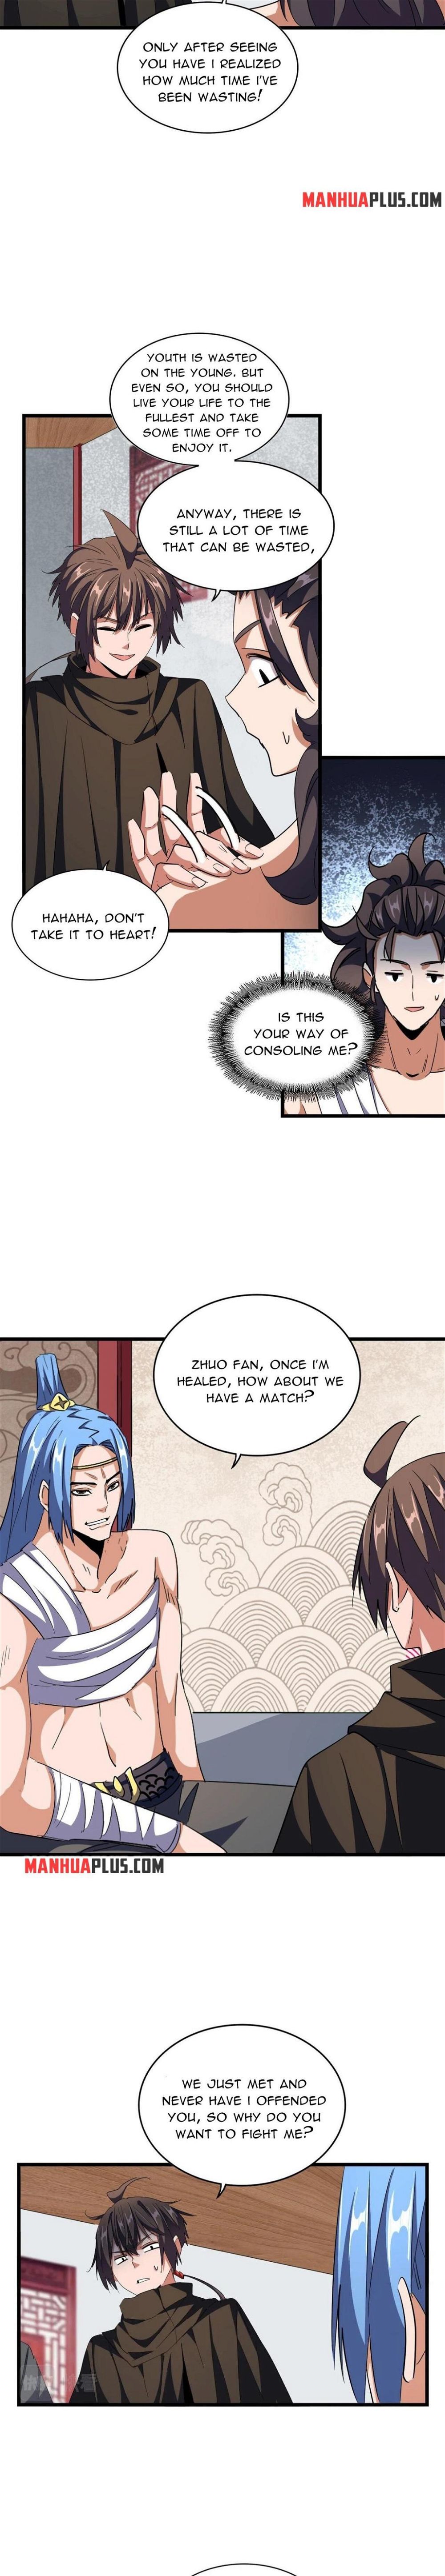 Magic Emperor Chapter 300 - Page 2